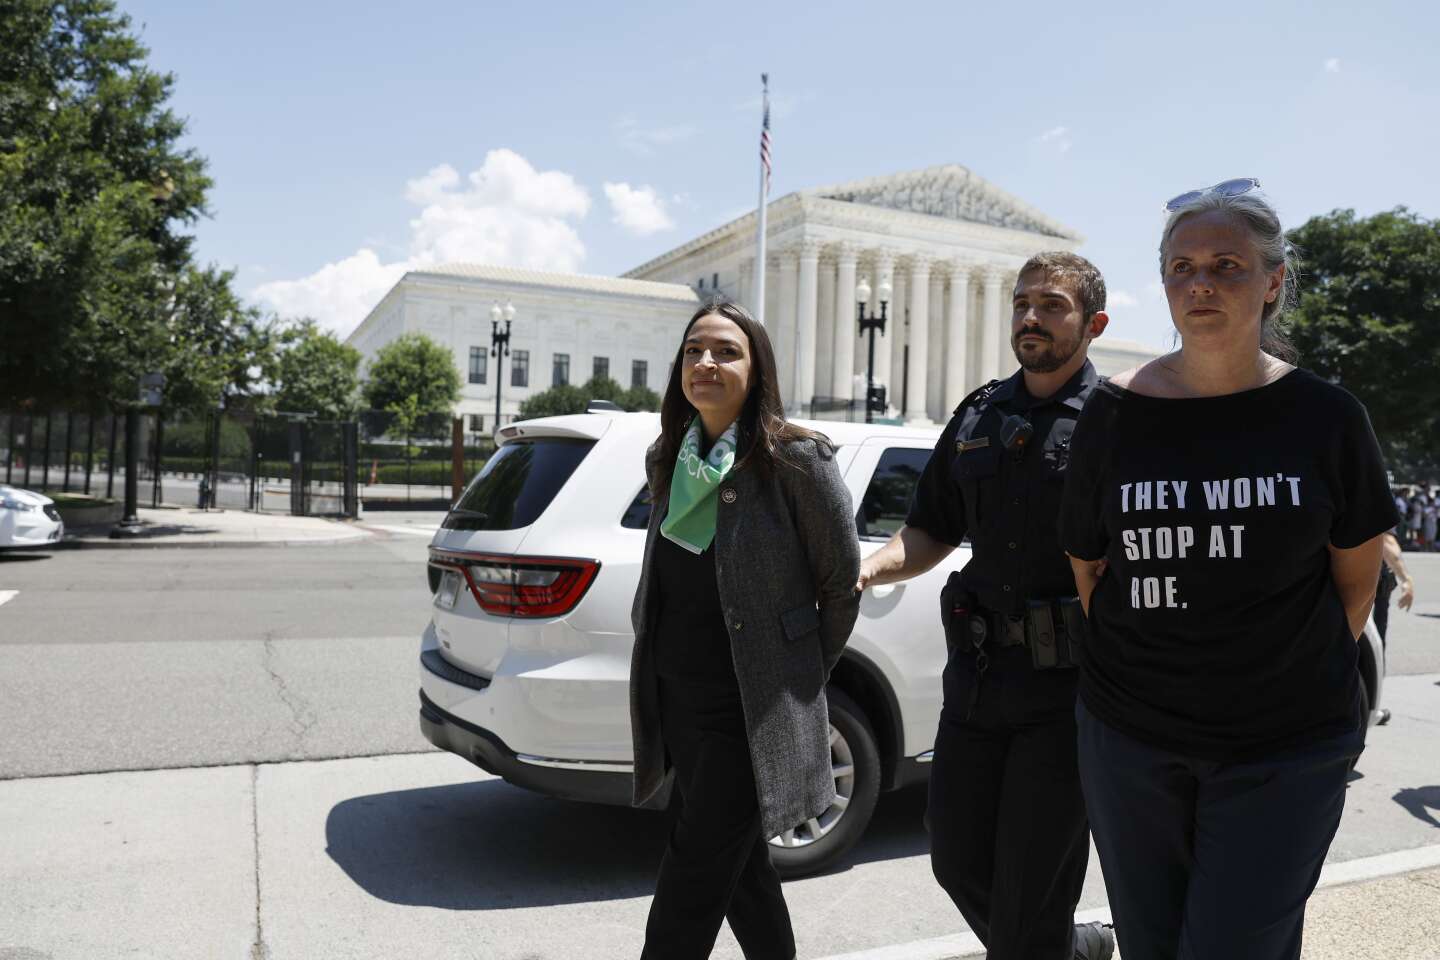 Alexandria Ocasio-Cortez was arrested along with other lawmakers during an abortion rights protest in Washington.